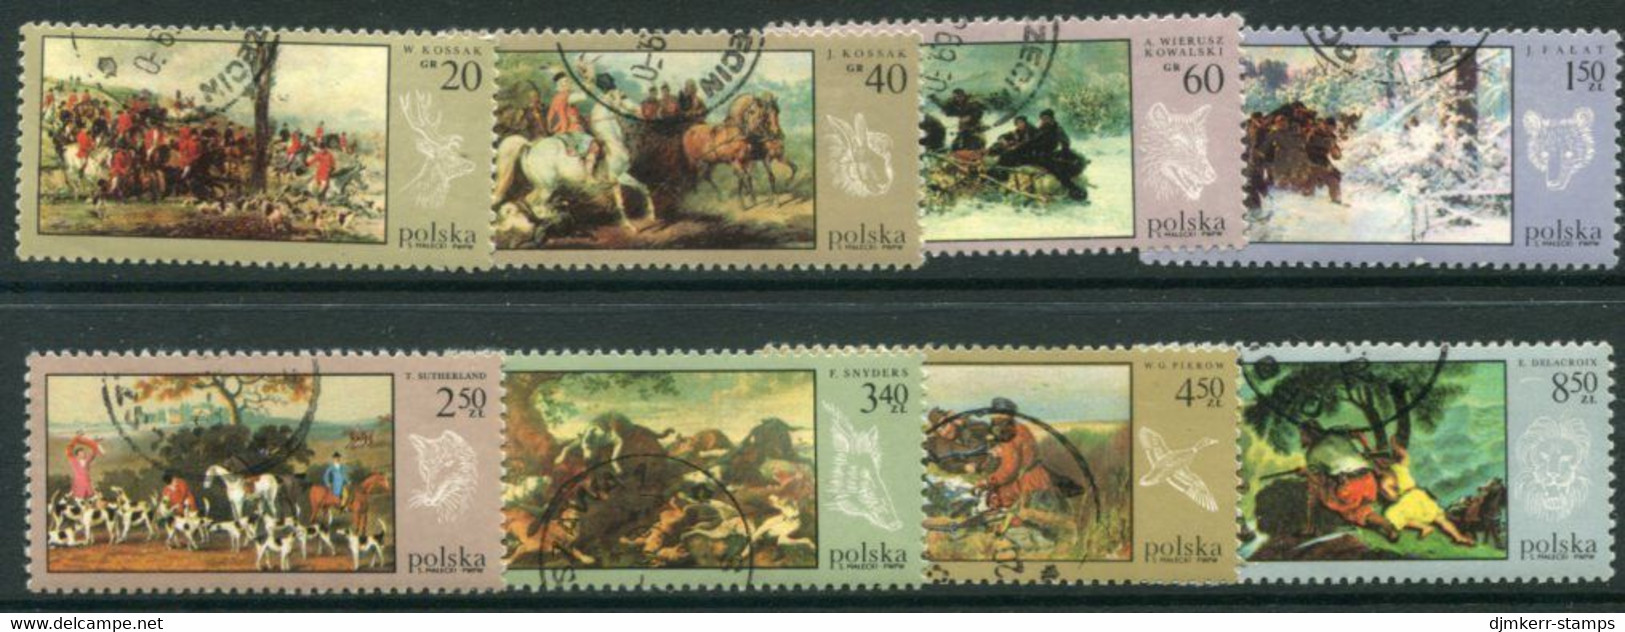 POLAND 1968 Paintings: Hunting Scenes Used.  Michel 1890-97 - Gebraucht